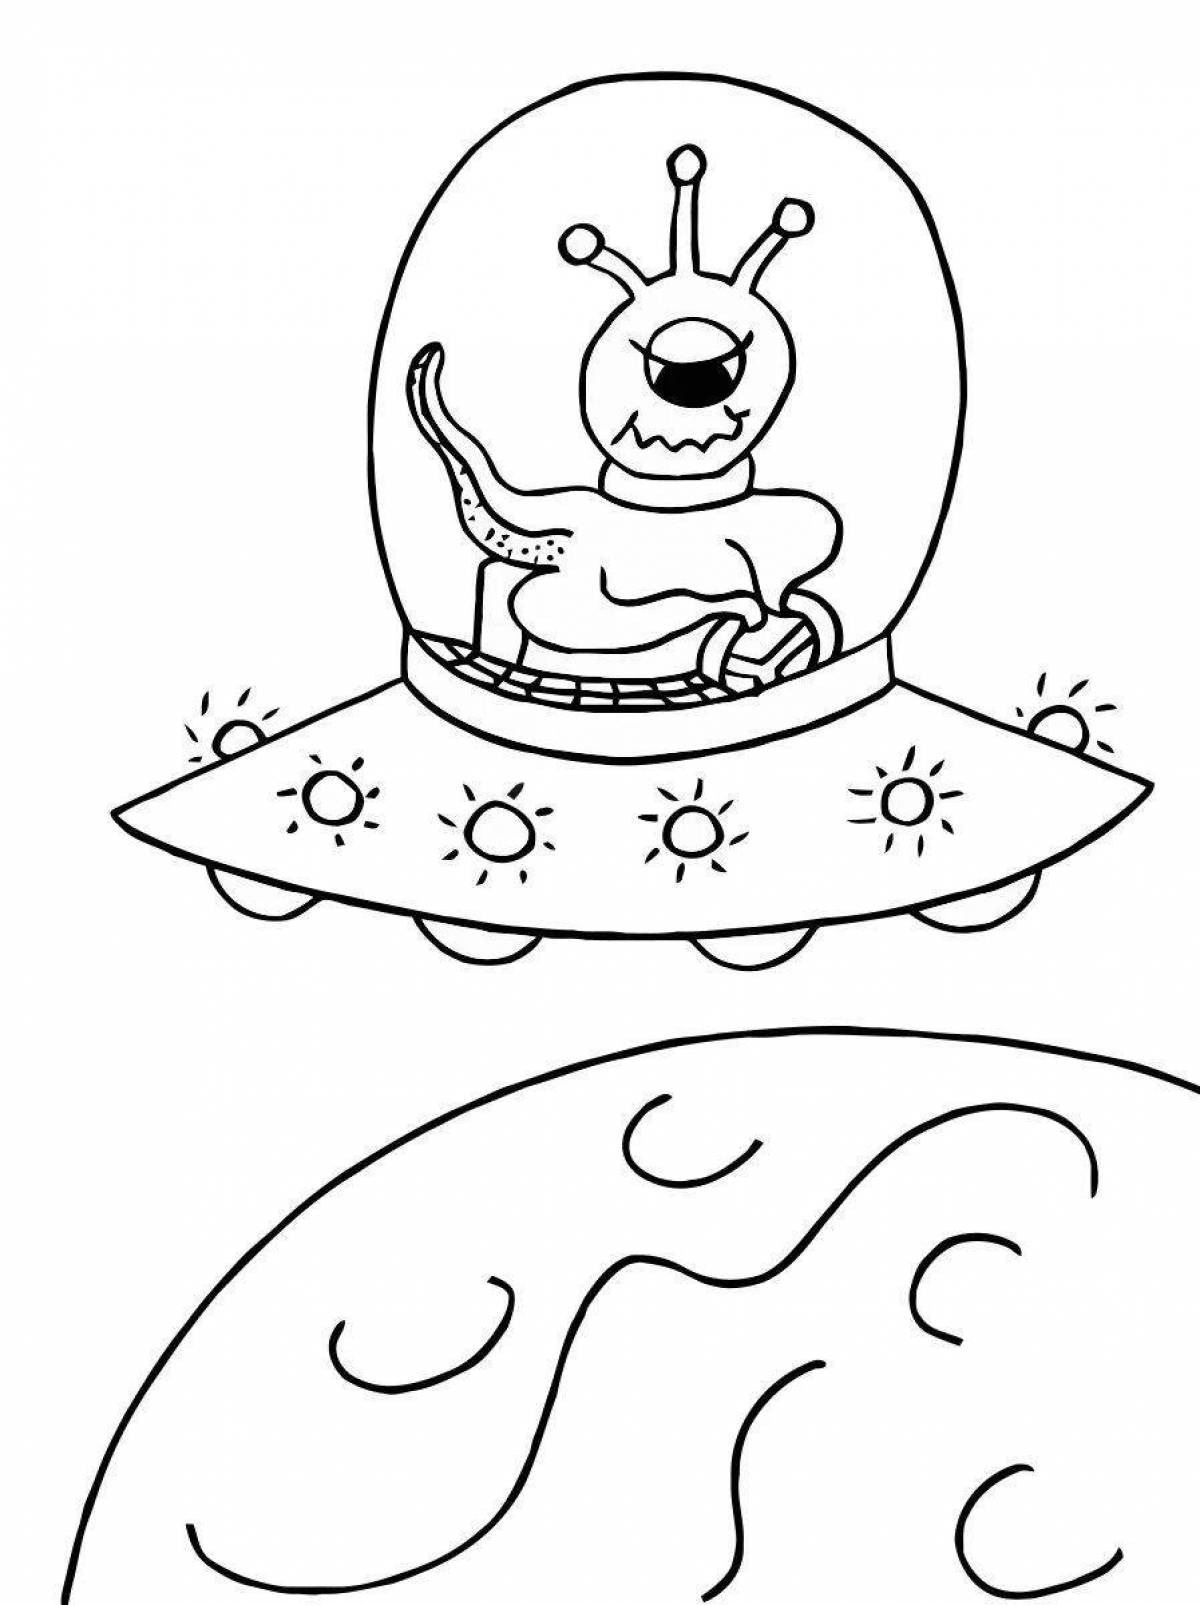 Playful alien coloring page for kids